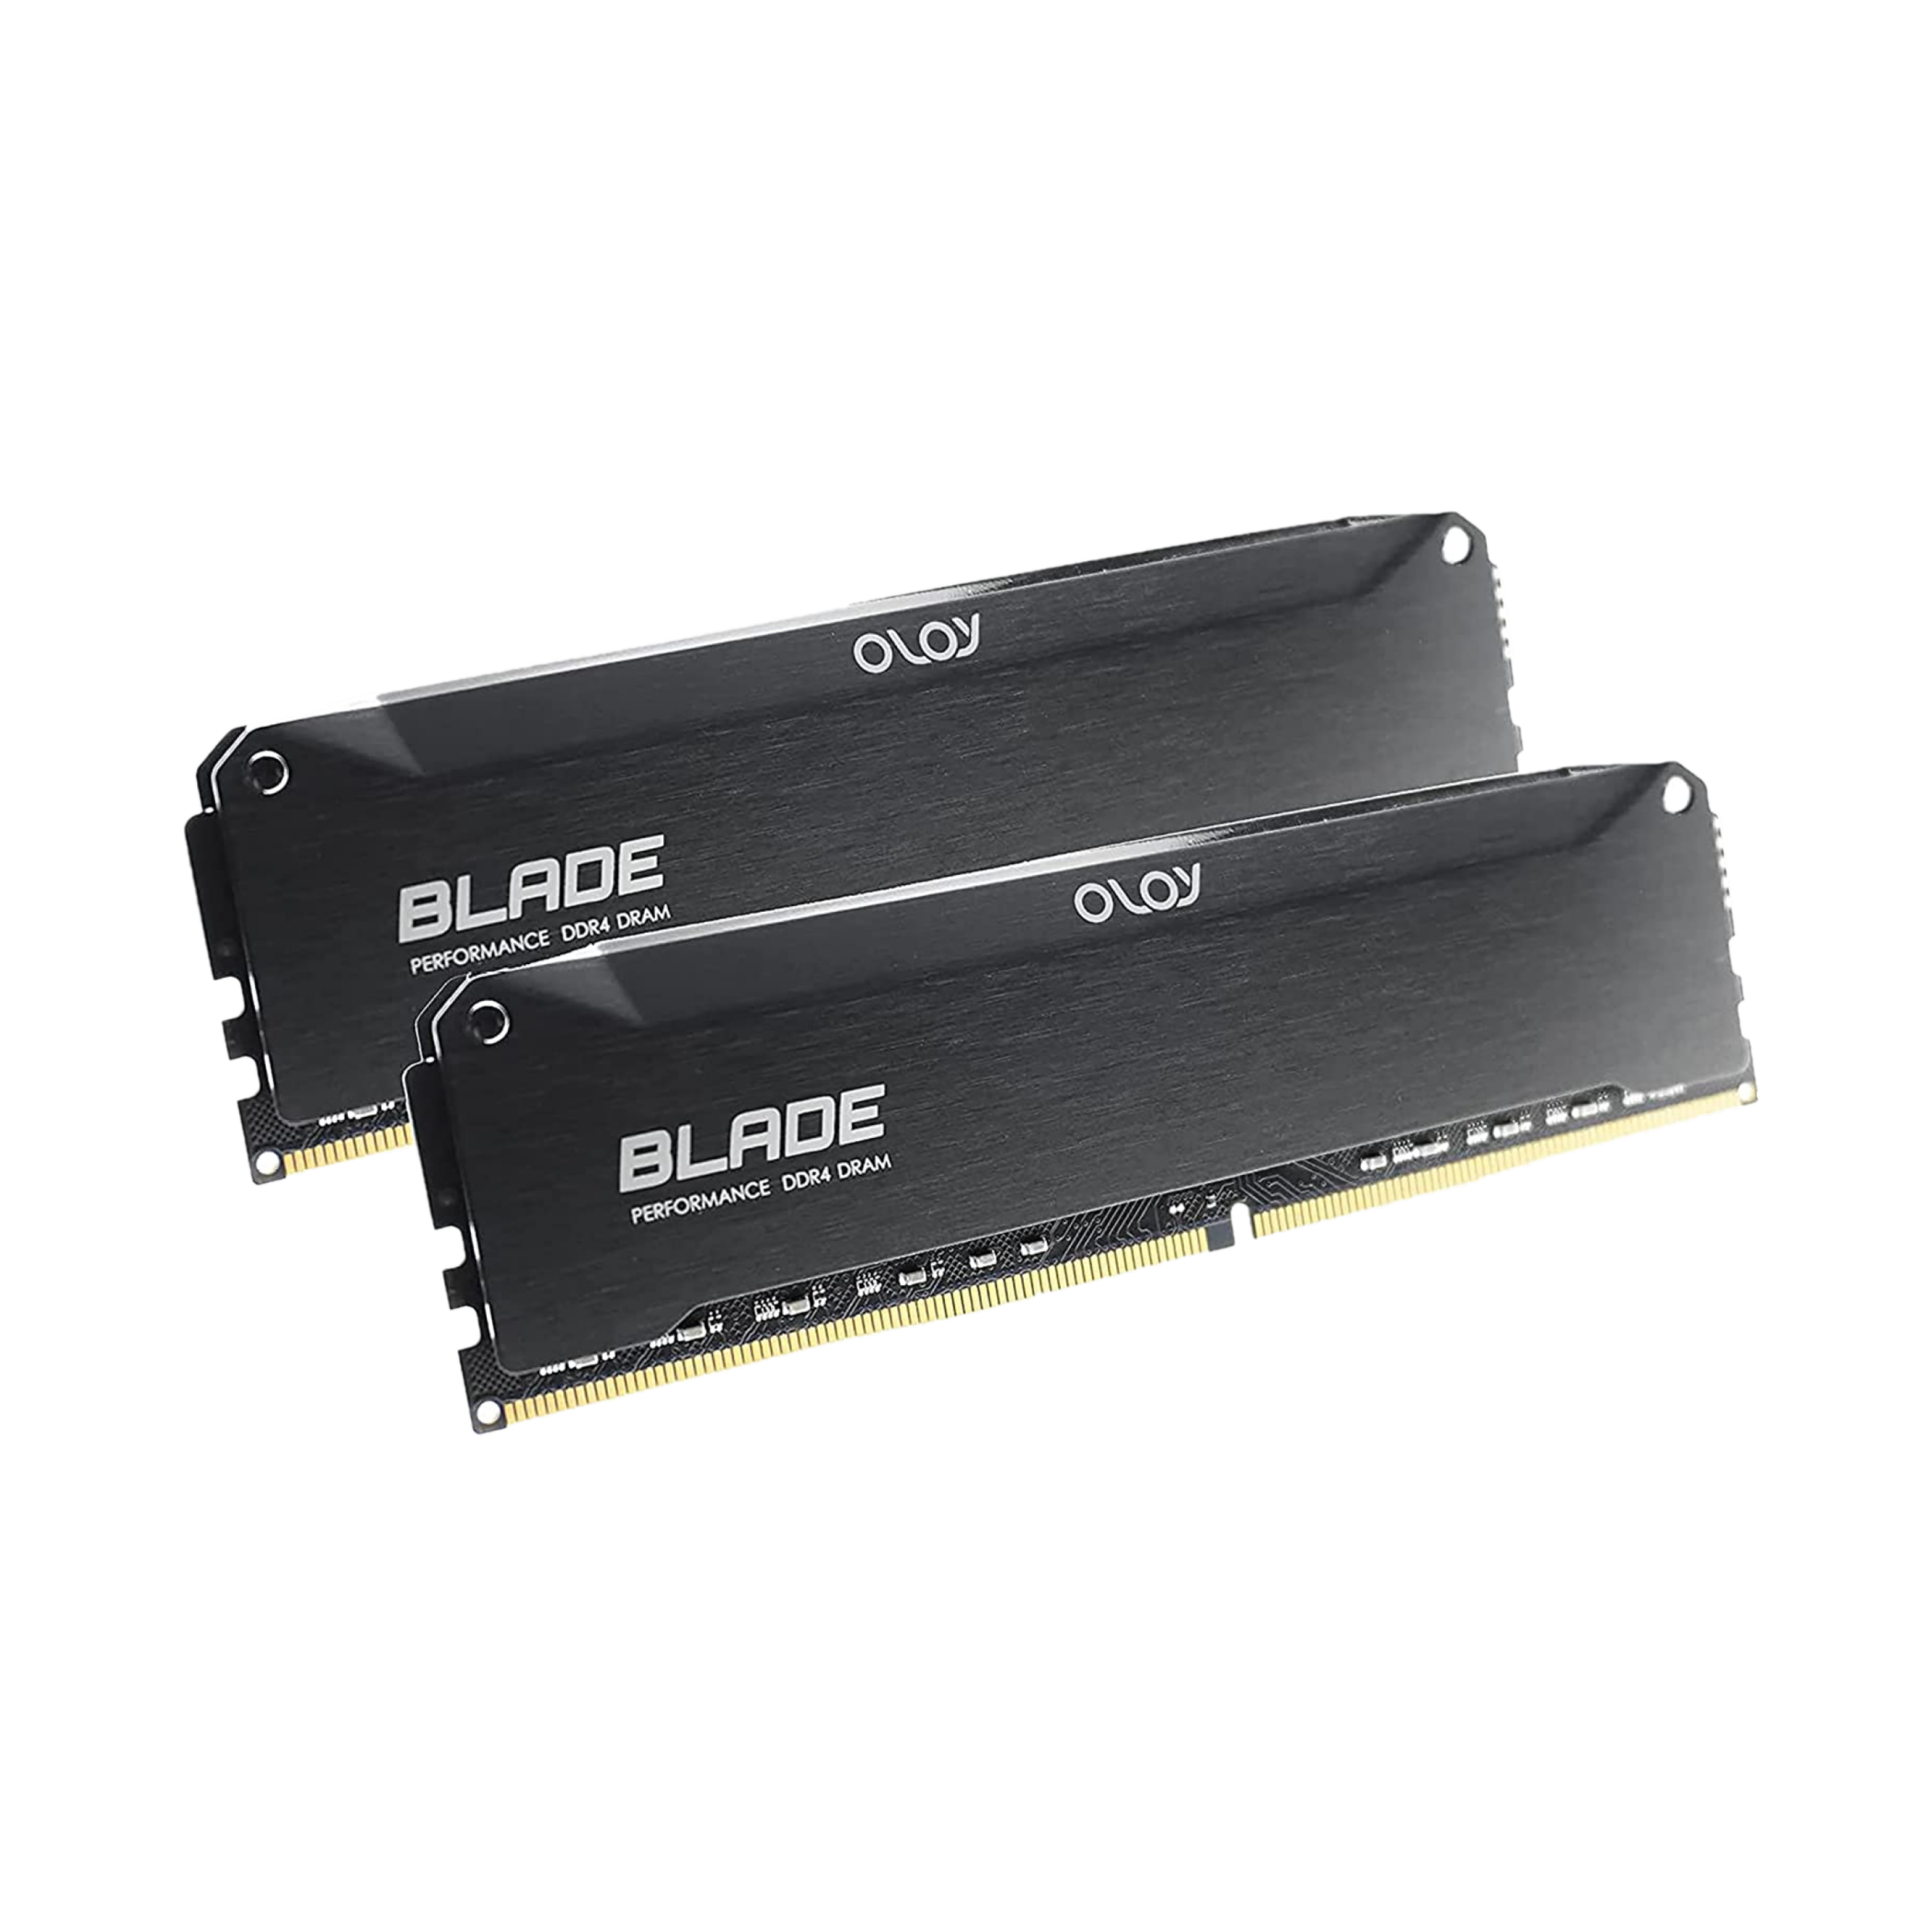 The Oloy Blade DDR4 RAM.